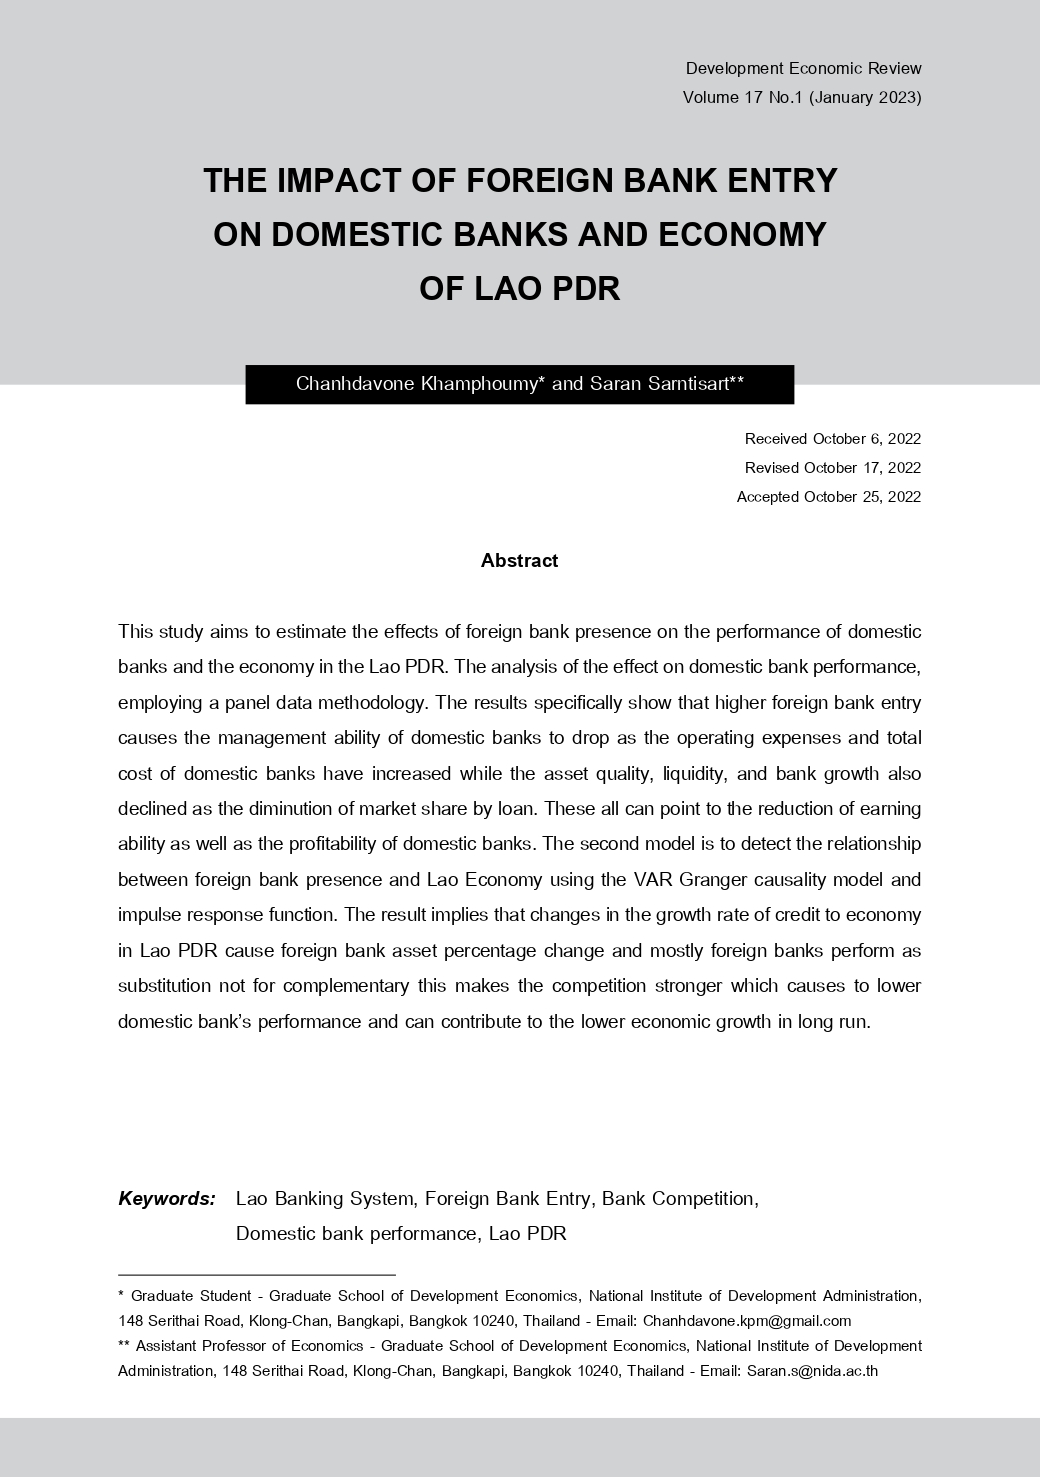 THE IMPACT OF FOREIGN BANK ENTRY ON DOMESTIC BANKS AND ECONOMY OF LAO PDR